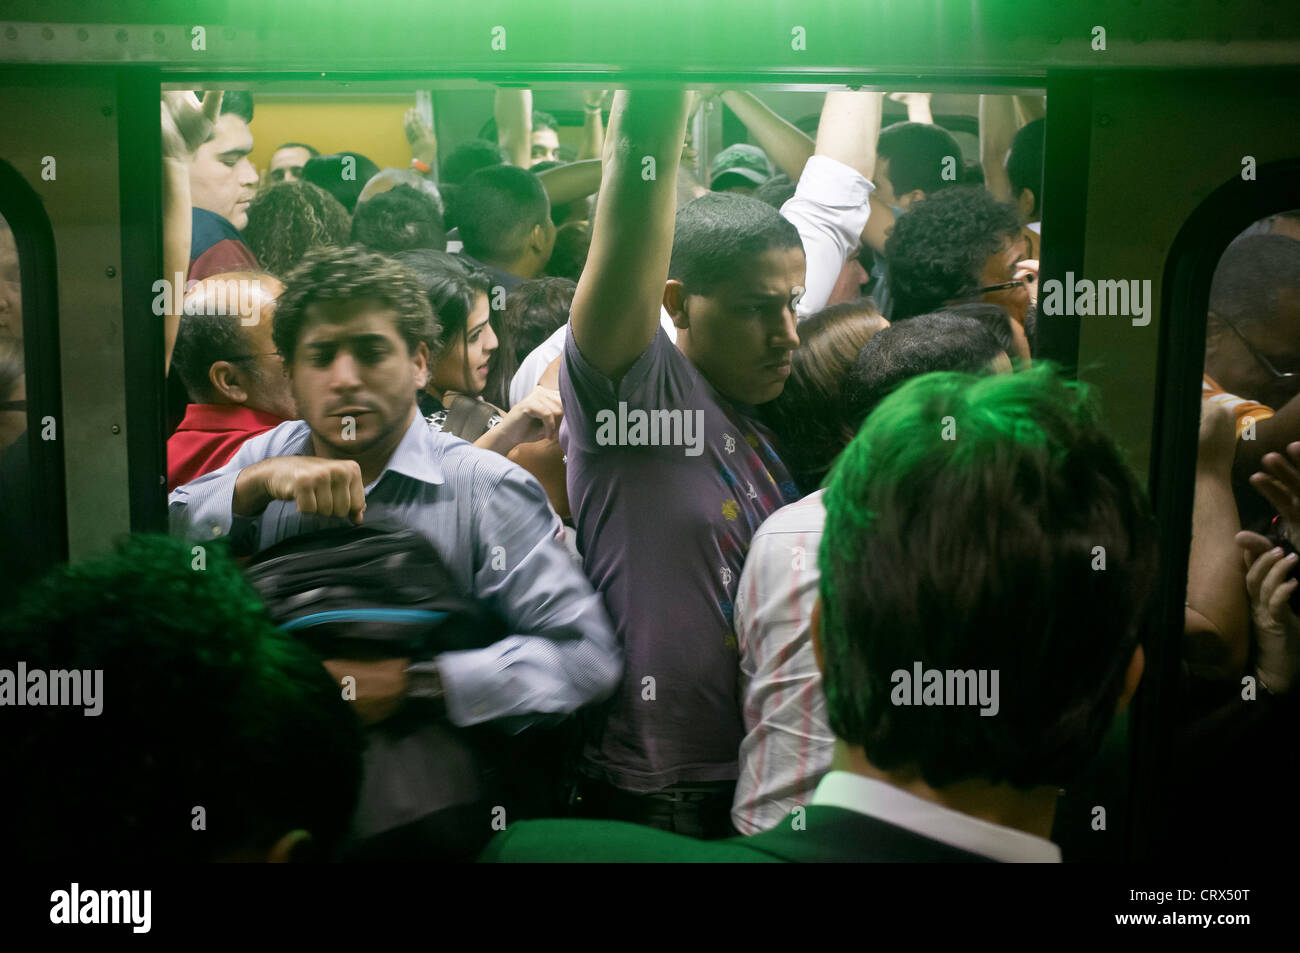 People trying to get into the train at Carioca Station subway in downtown Rio de Janeiro, Brazil. Train door closing Stock Photo